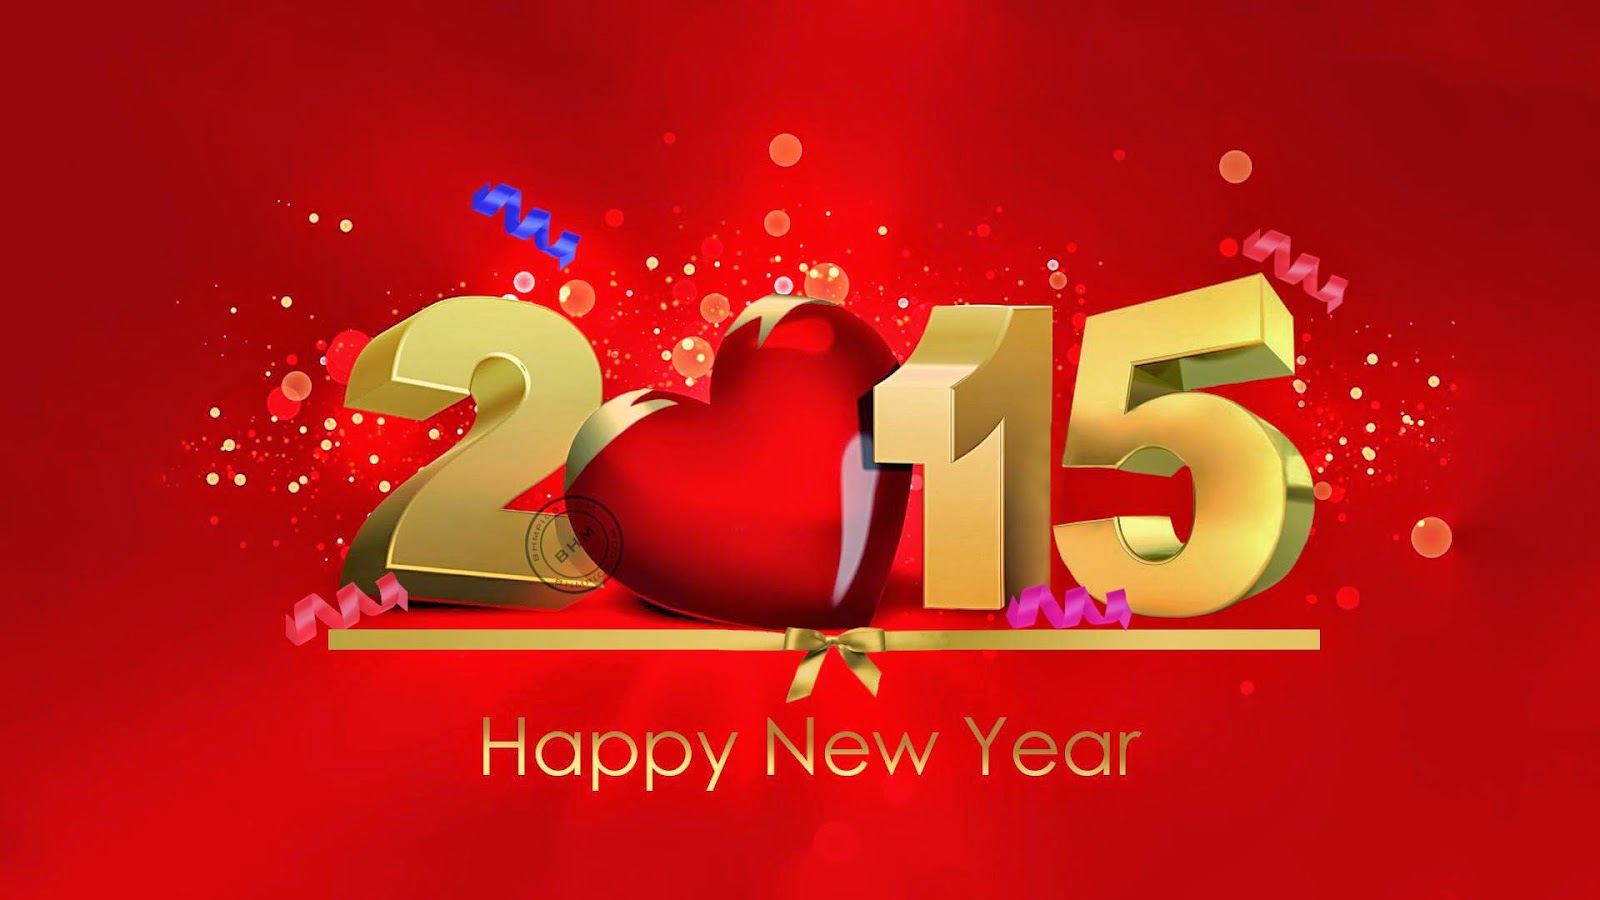 150 Best FB Timeline Covers s For Happy New Year 2015